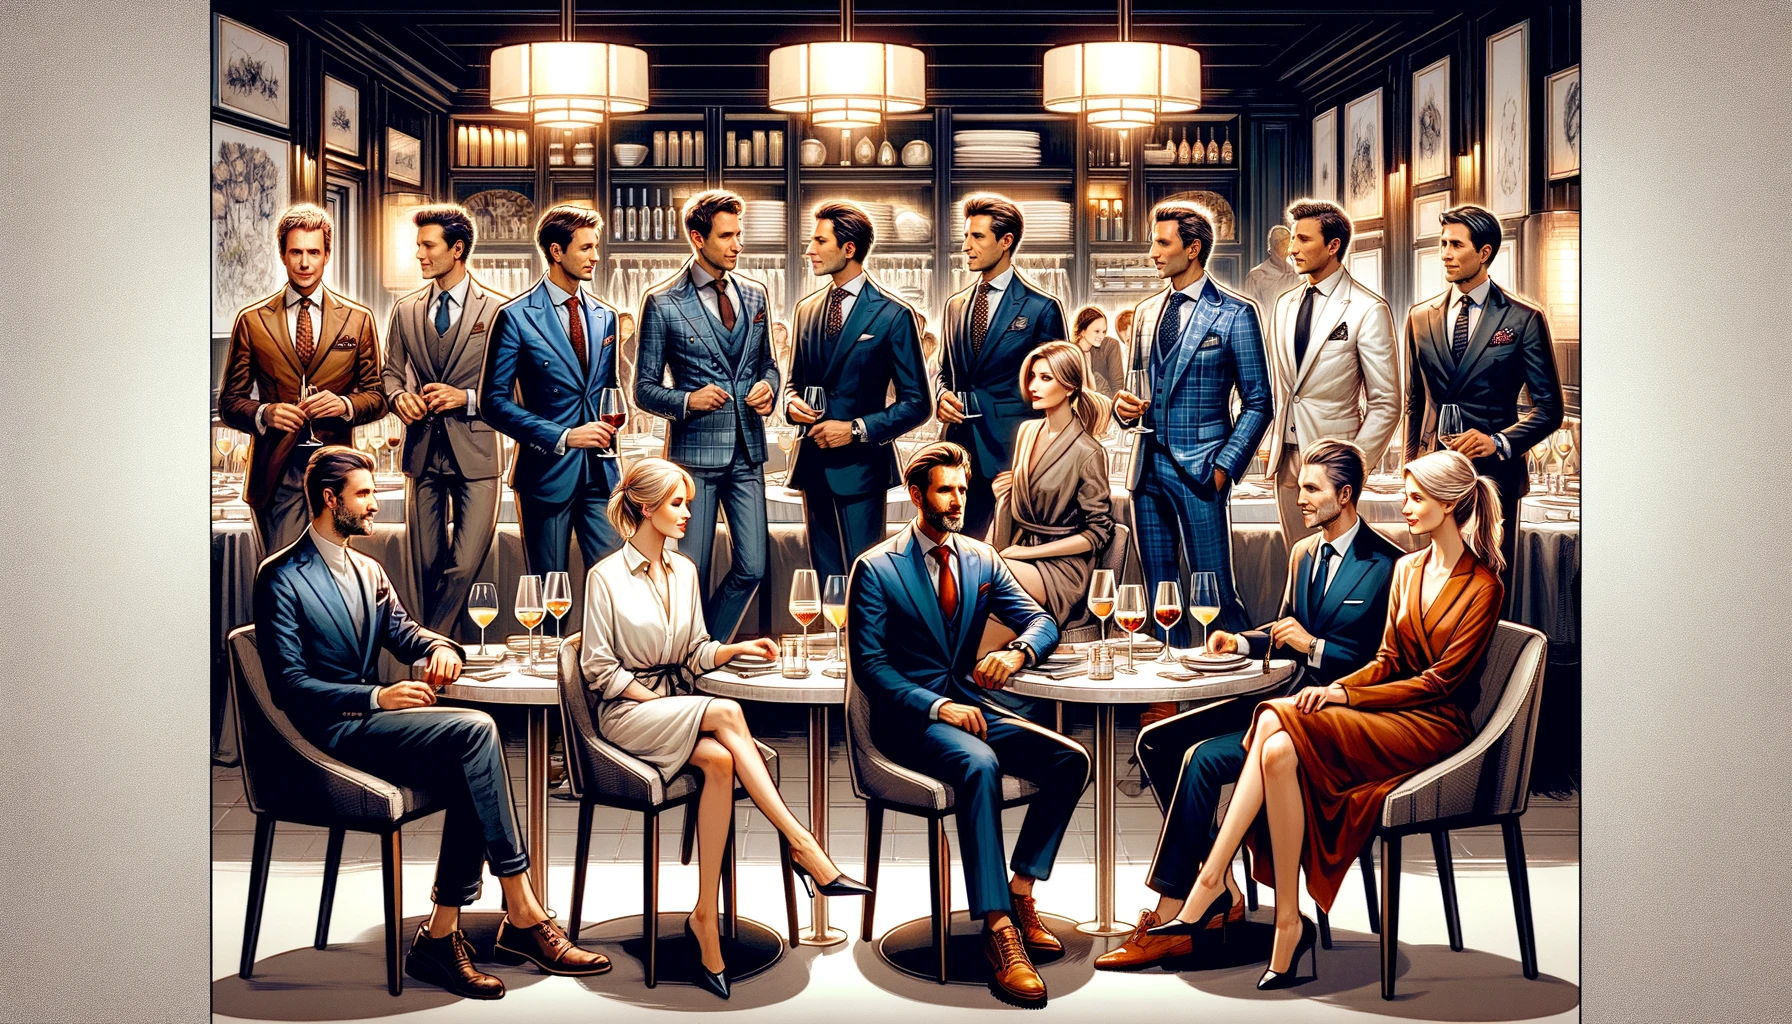 An elegant and stylish dining scene that illustrates specific examples of the smart casual dress code at Wolfgang's Steakhouse. The image includes diverse groups of diners, both men and women, dressed in exemplary smart casual attire. Men are depicted in tailored blazers over collared shirts with slacks or dark jeans, while women are in sophisticated dresses or chic combinations of blouses and skirts. The setting is a luxurious Wolfgang's Steakhouse interior, with tasteful decor and a warm, inviting ambiance, showcasing the upscale yet approachable dining experience.